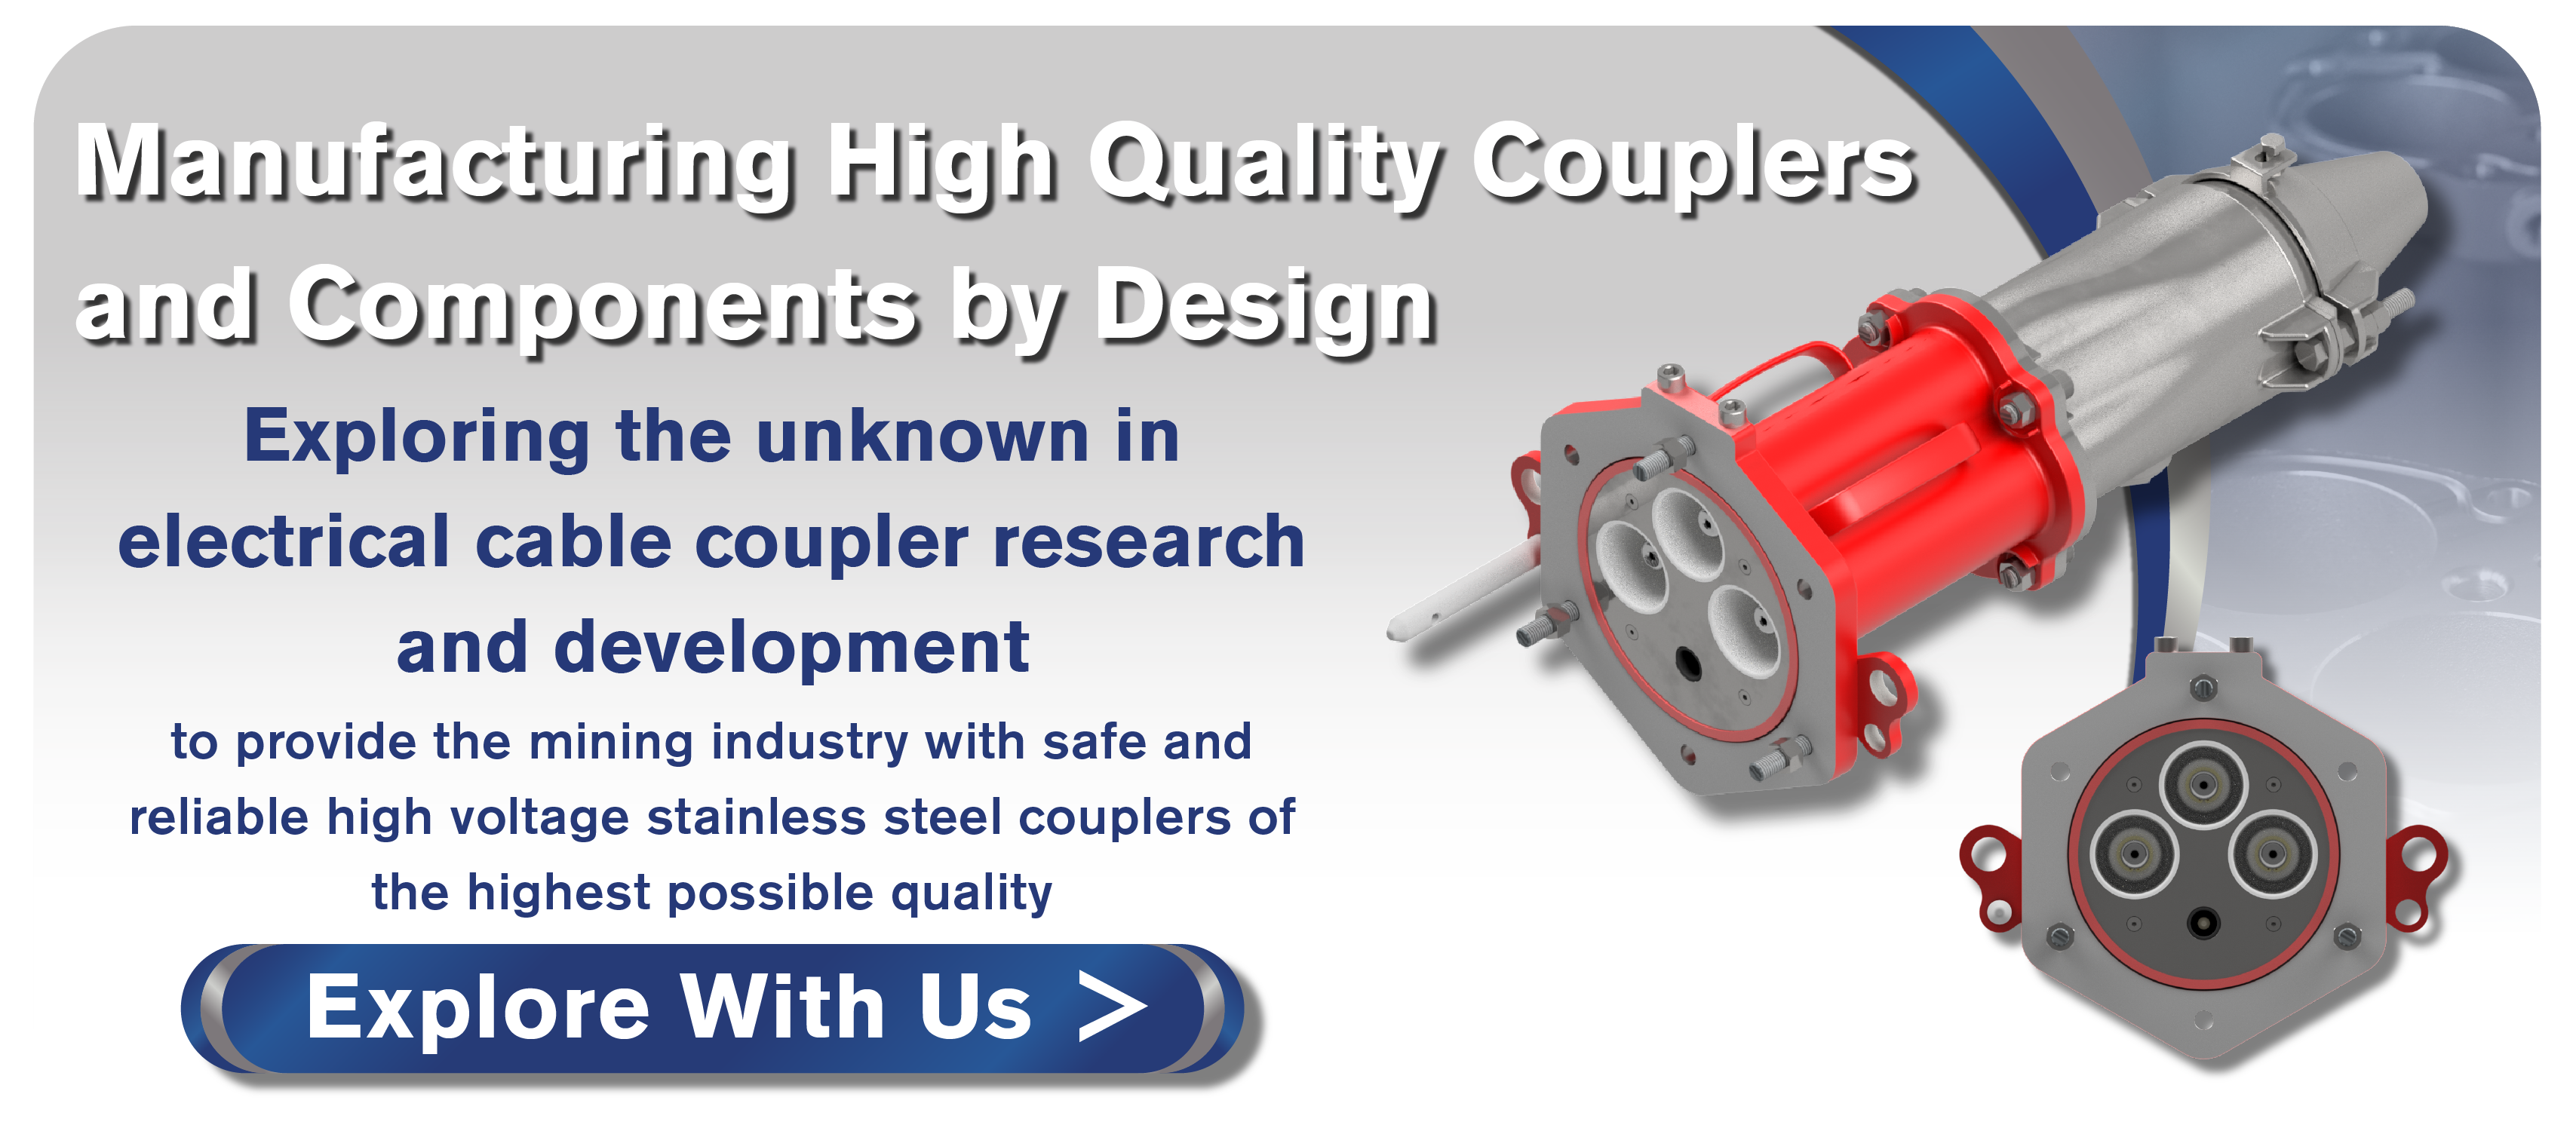 Manufacturing high quality couplers and components by design